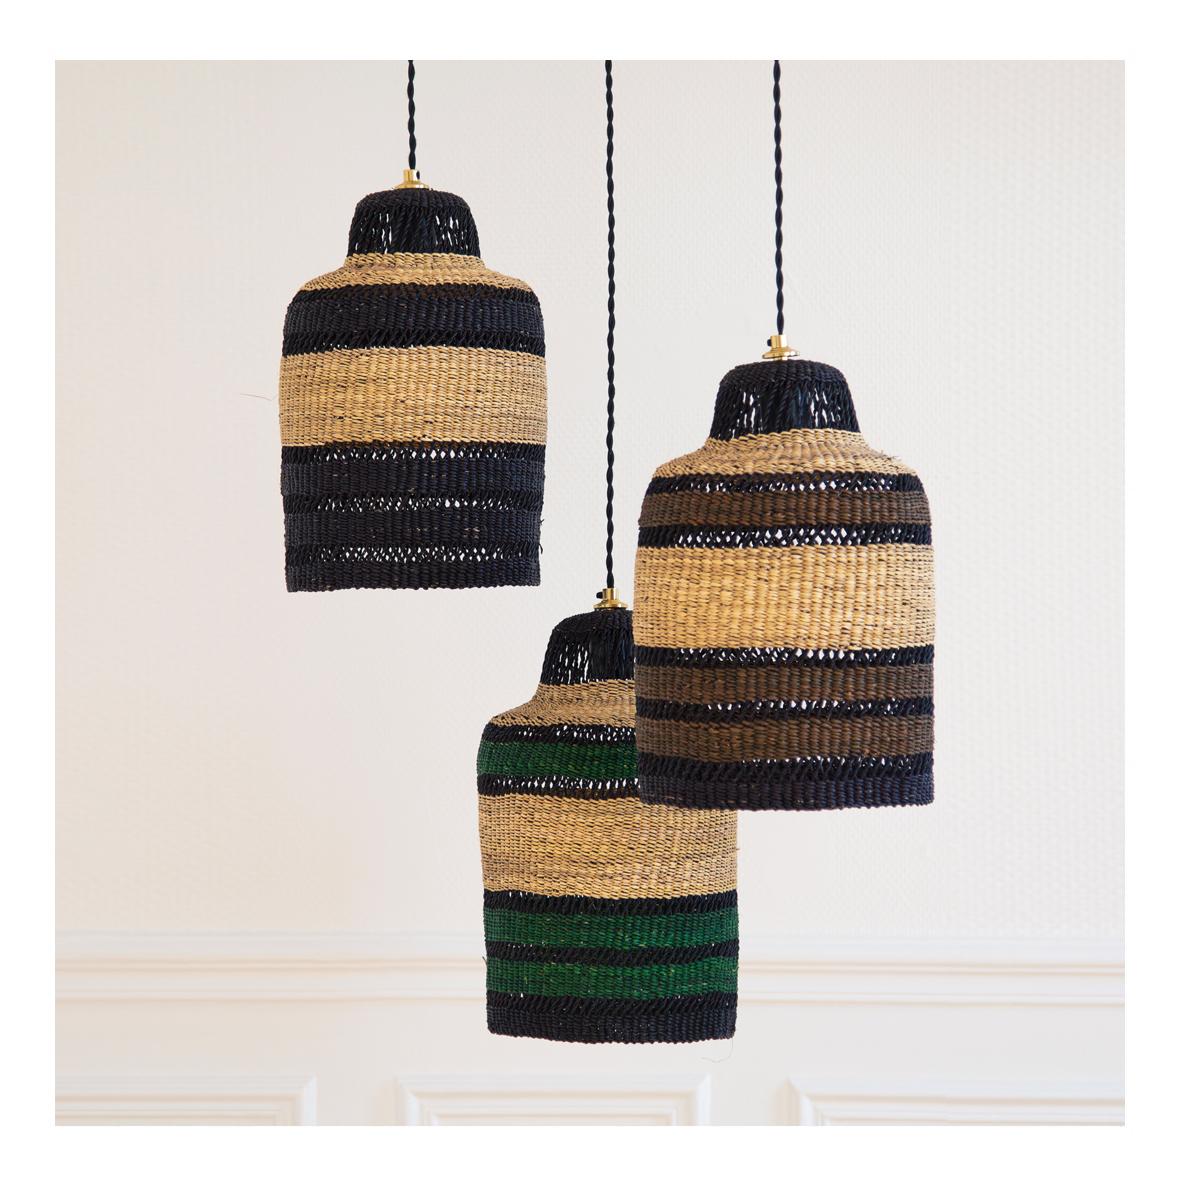 Small woven pendant lamp HIGH LIFE S : 
Spirited Artisanat
Colour: Herb (bottle green)

Are you looking for a small lamp funky lamp to light up a room? This black, green and natural pendant lamp will fill your room with light motifs. This very